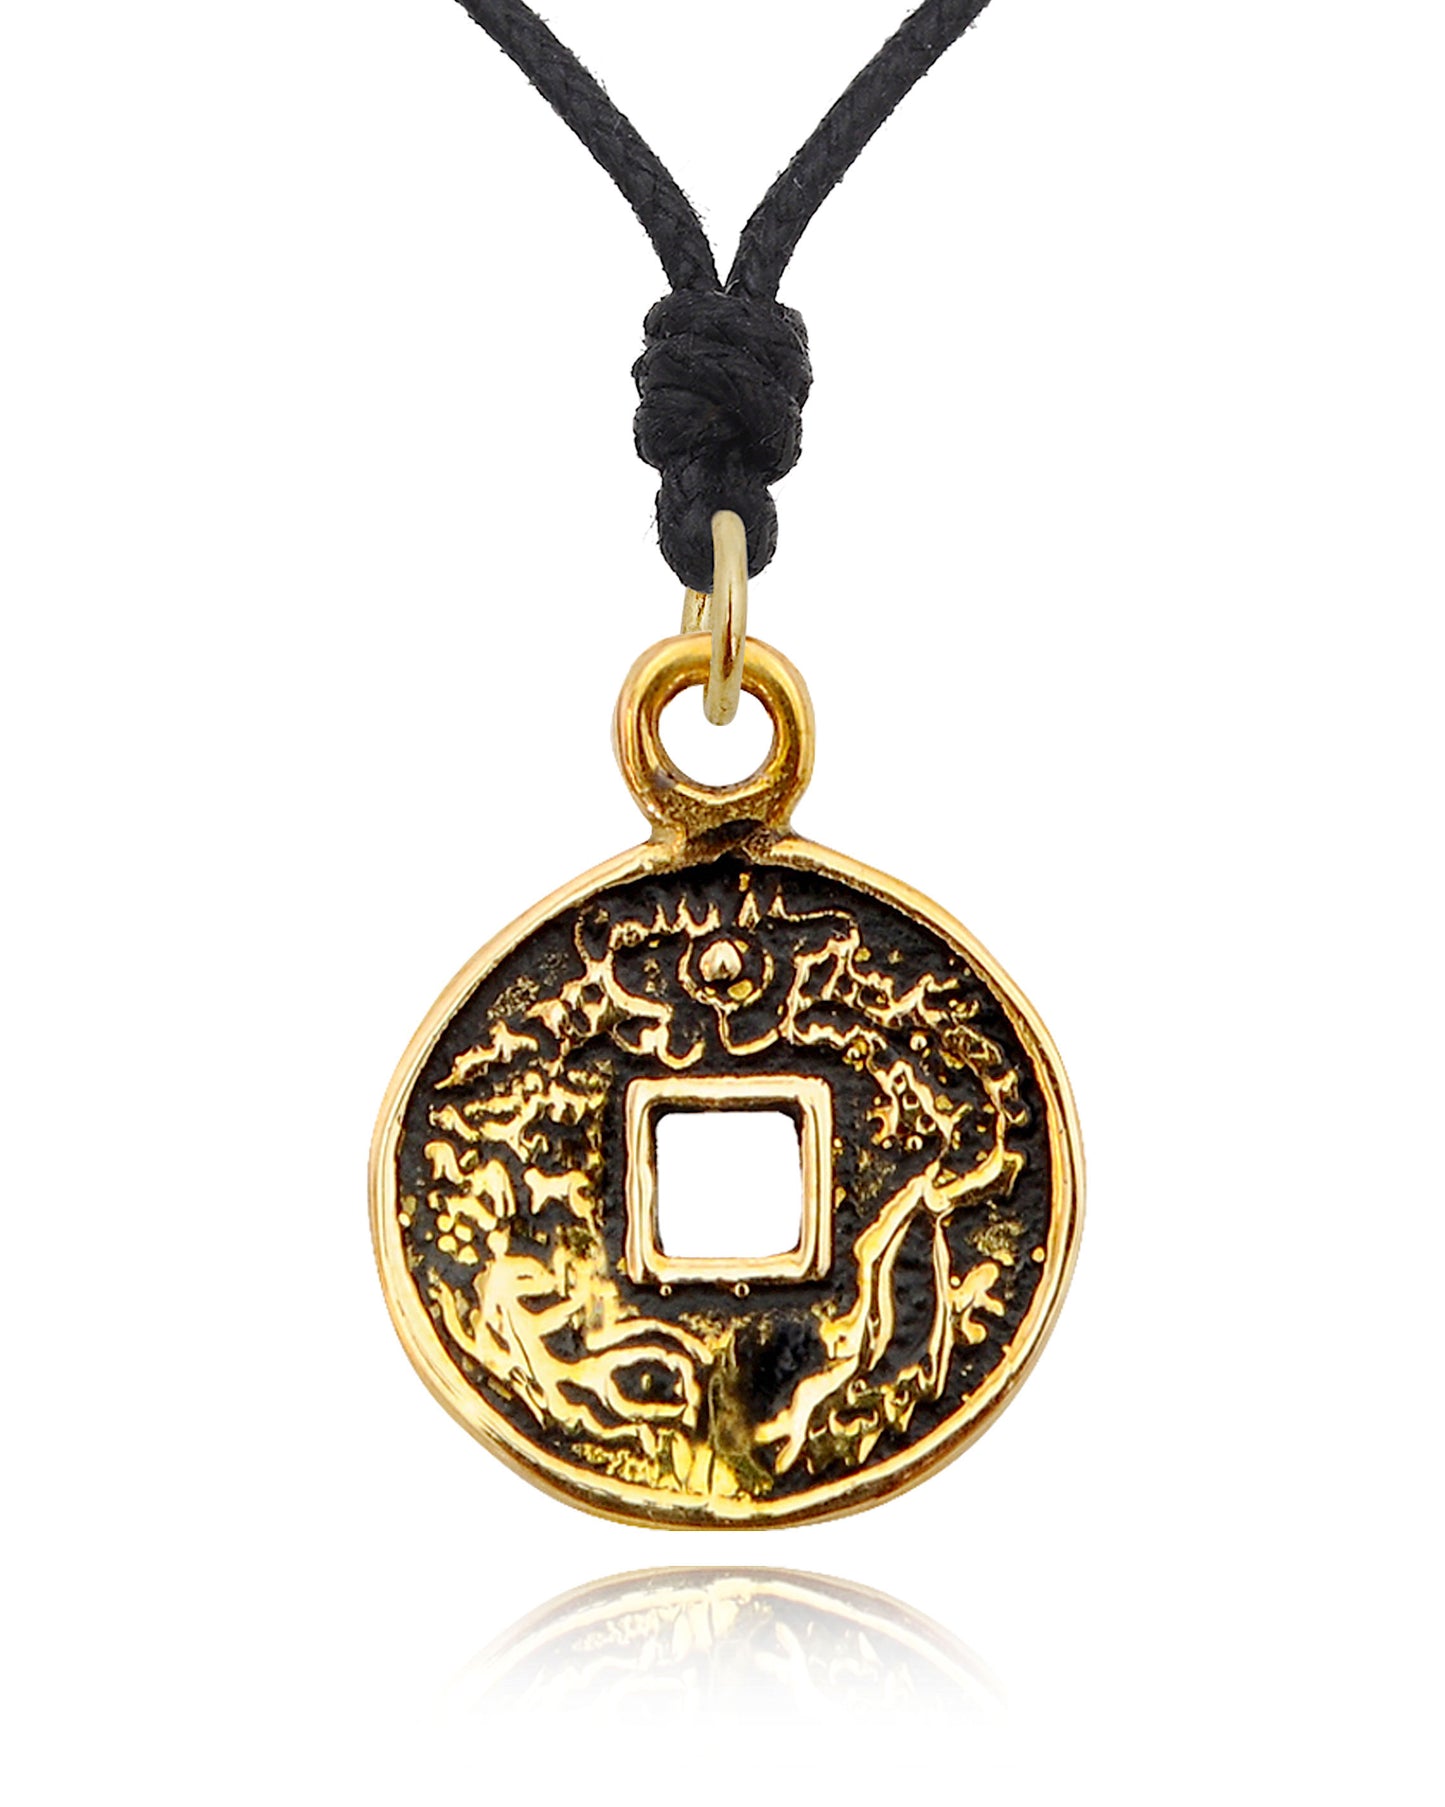 I Ching Coin Fen Shui Sterling Silver Gold Brass Necklace Pendant Jewelry